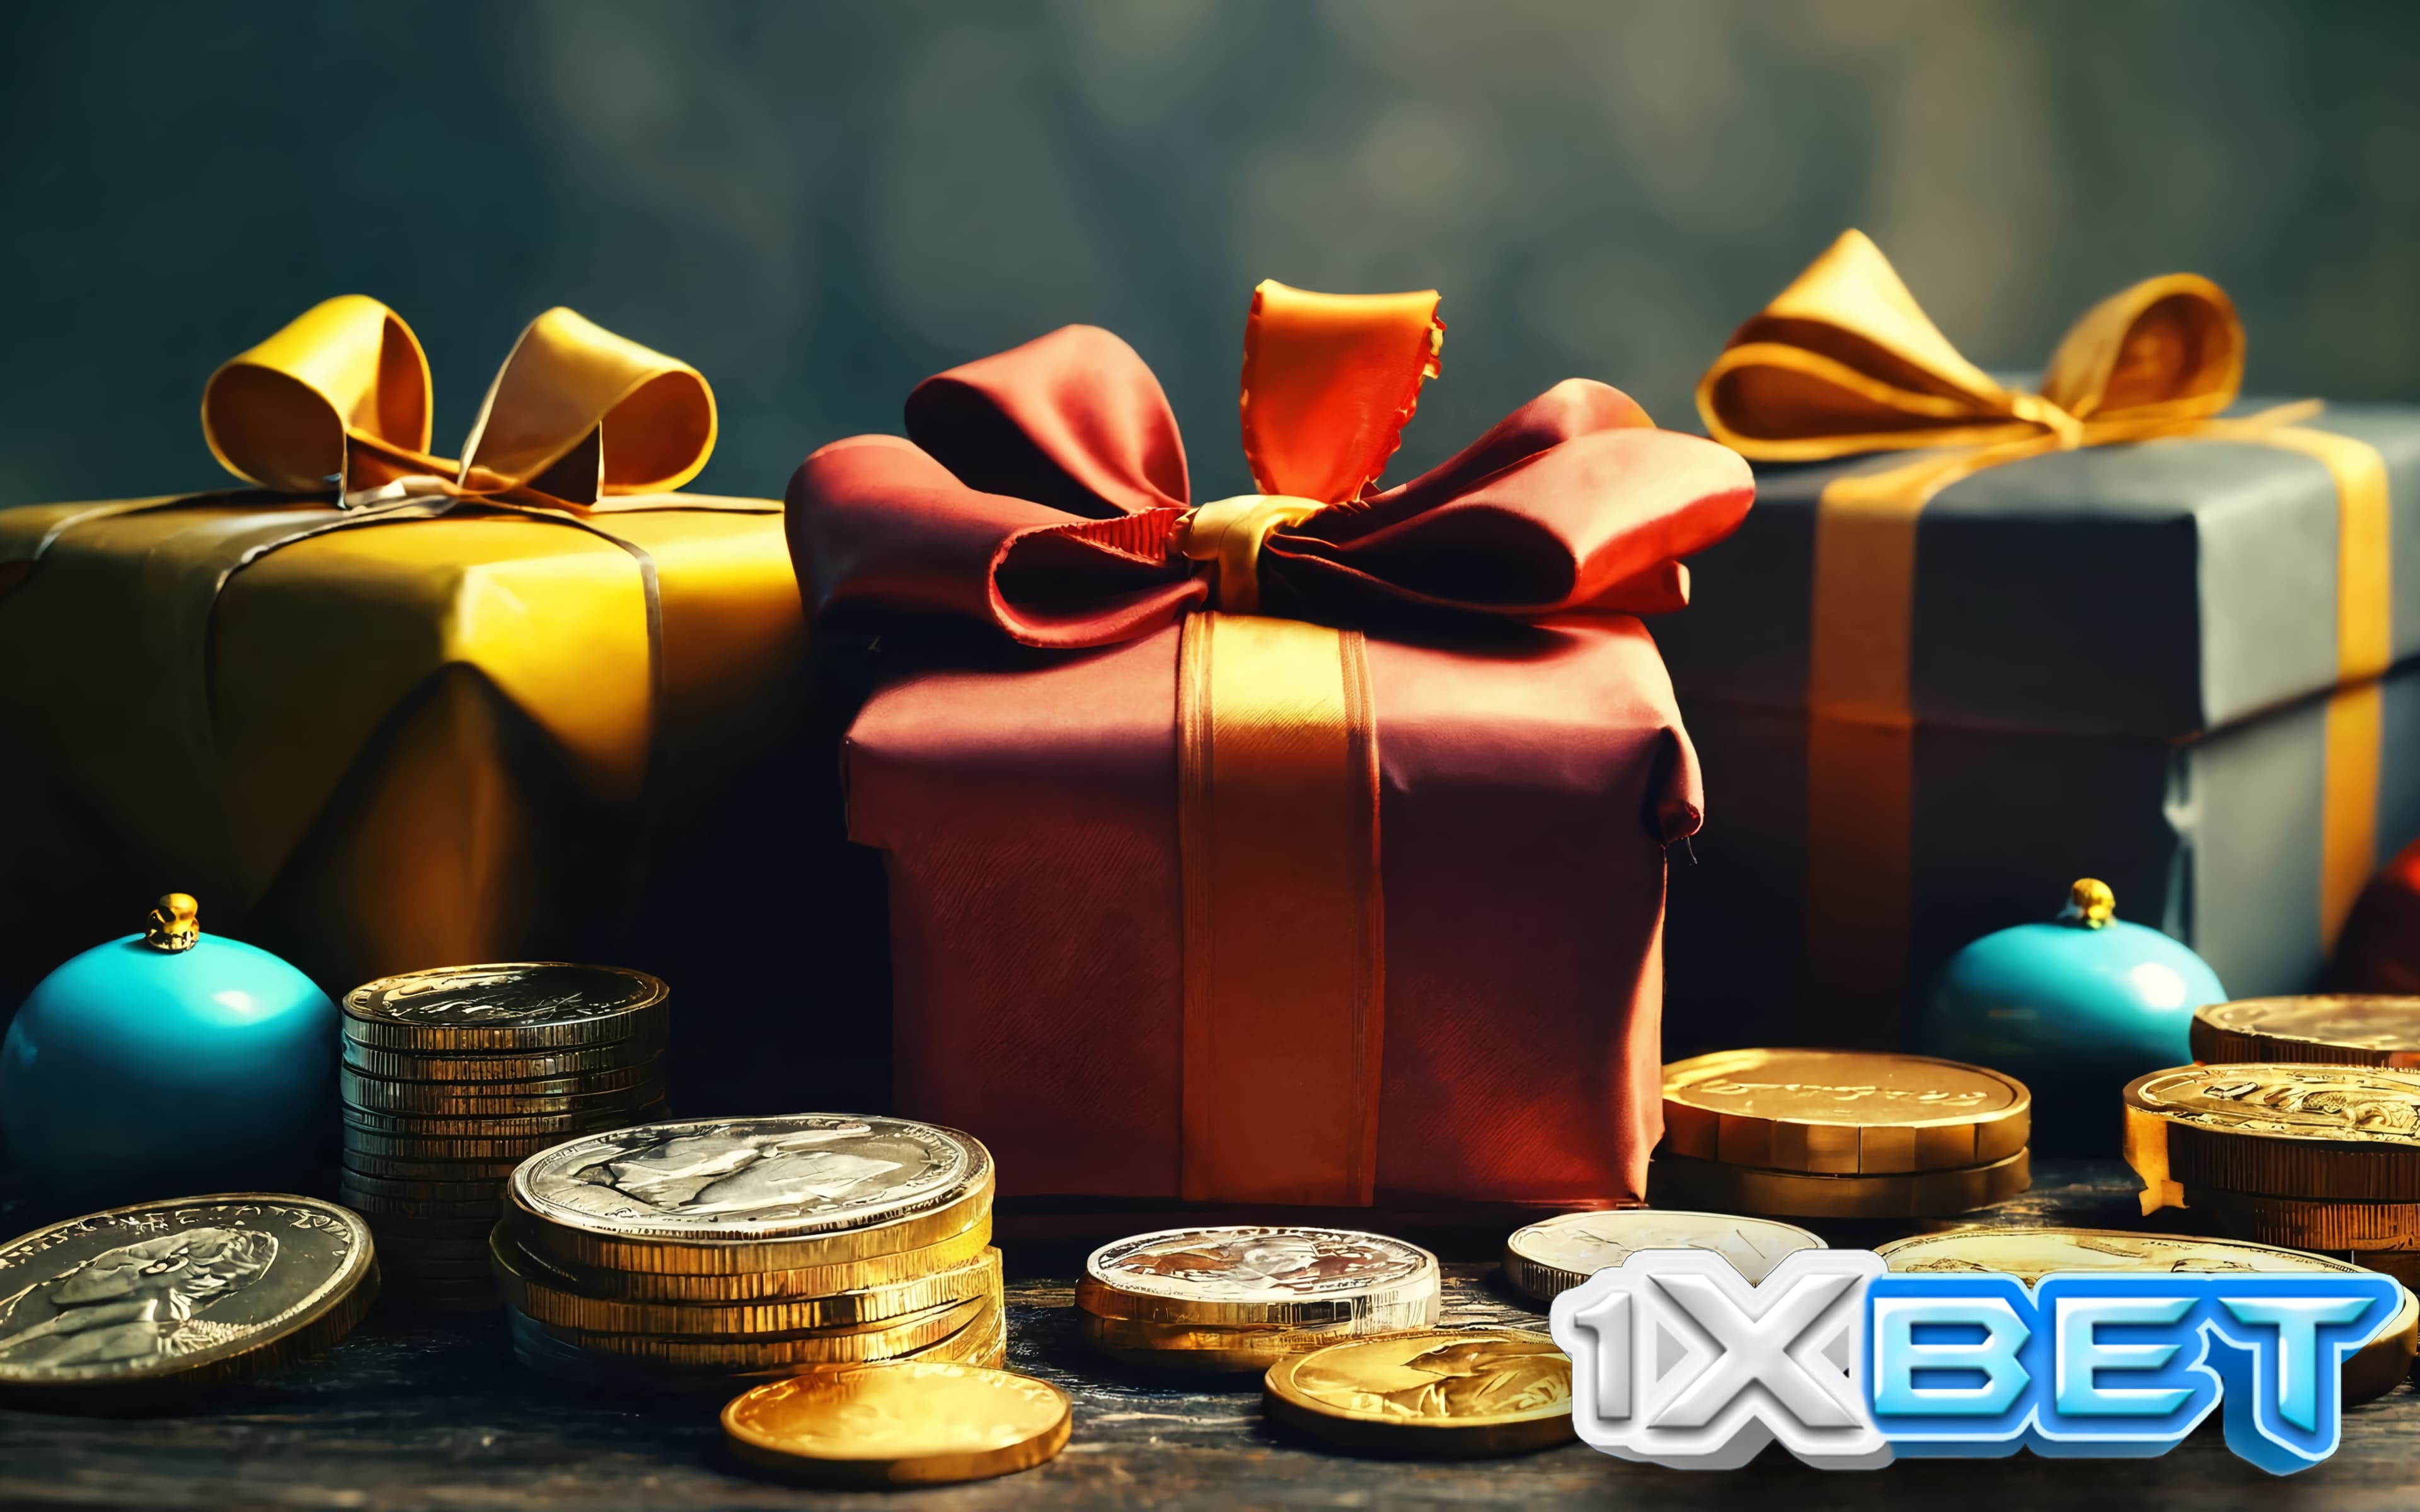 1xbet bonuses and promotions